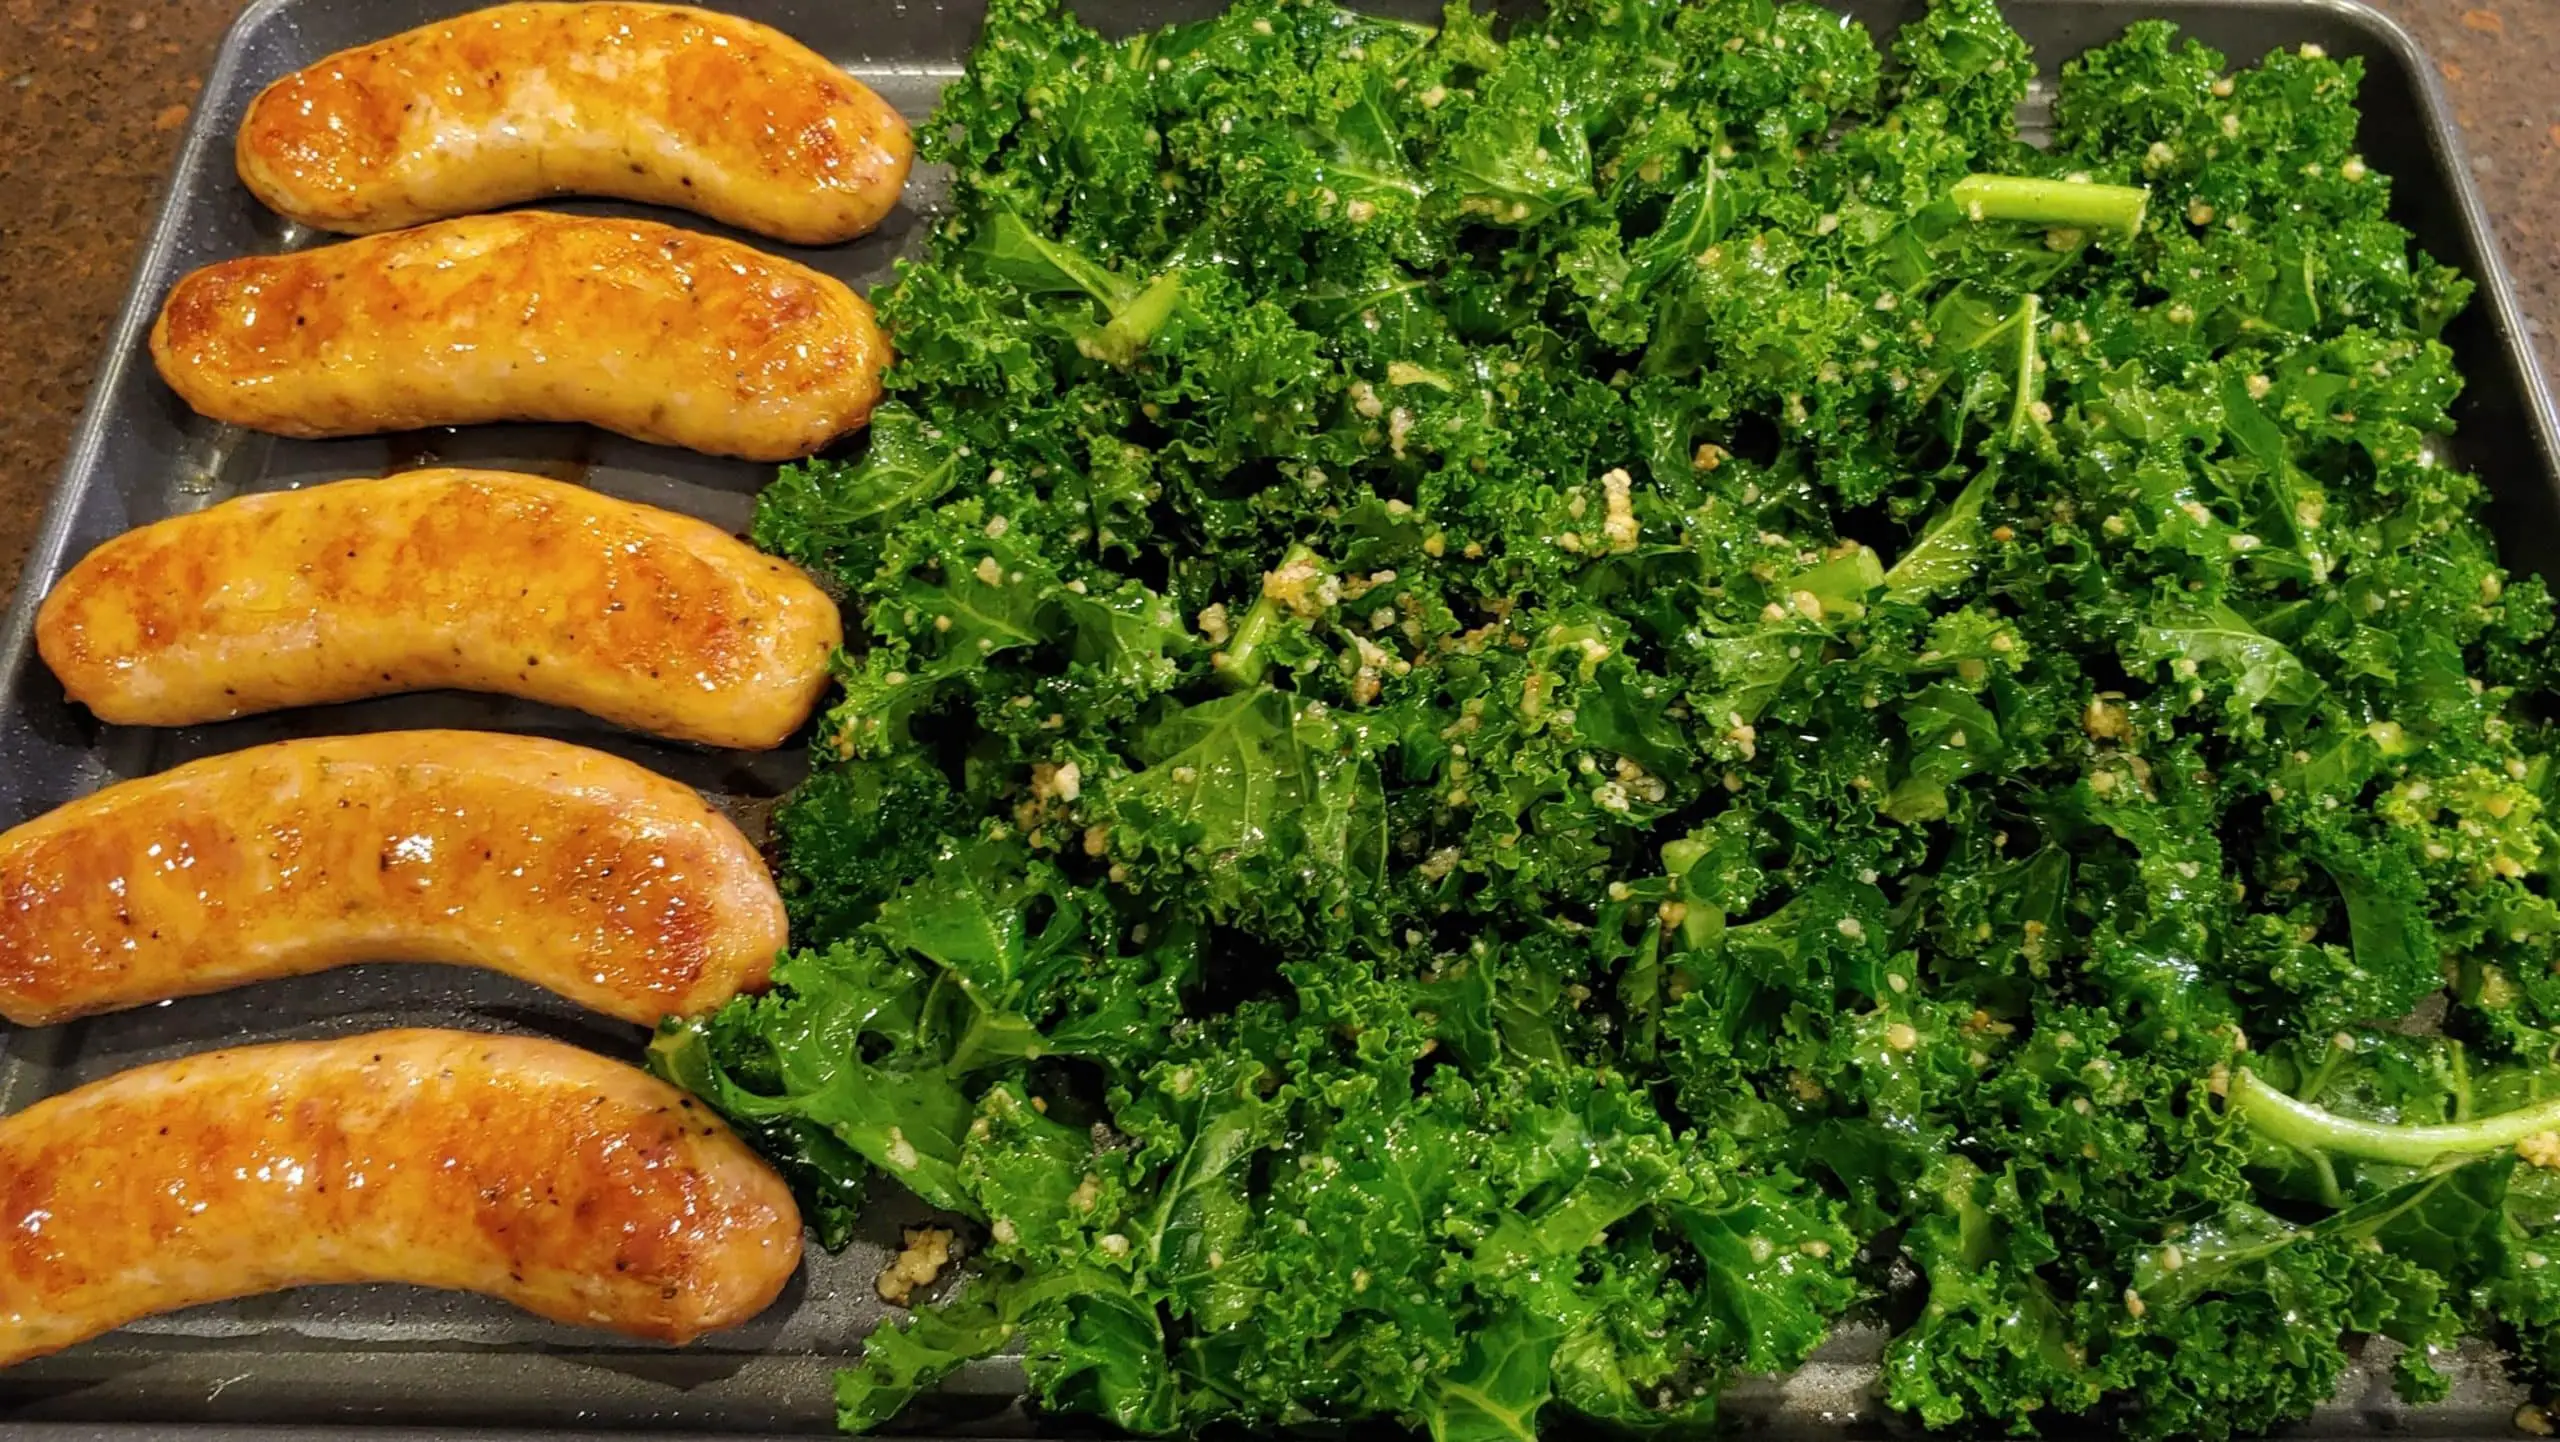 roasting kale and chicken sausages - Dining in with Danielle